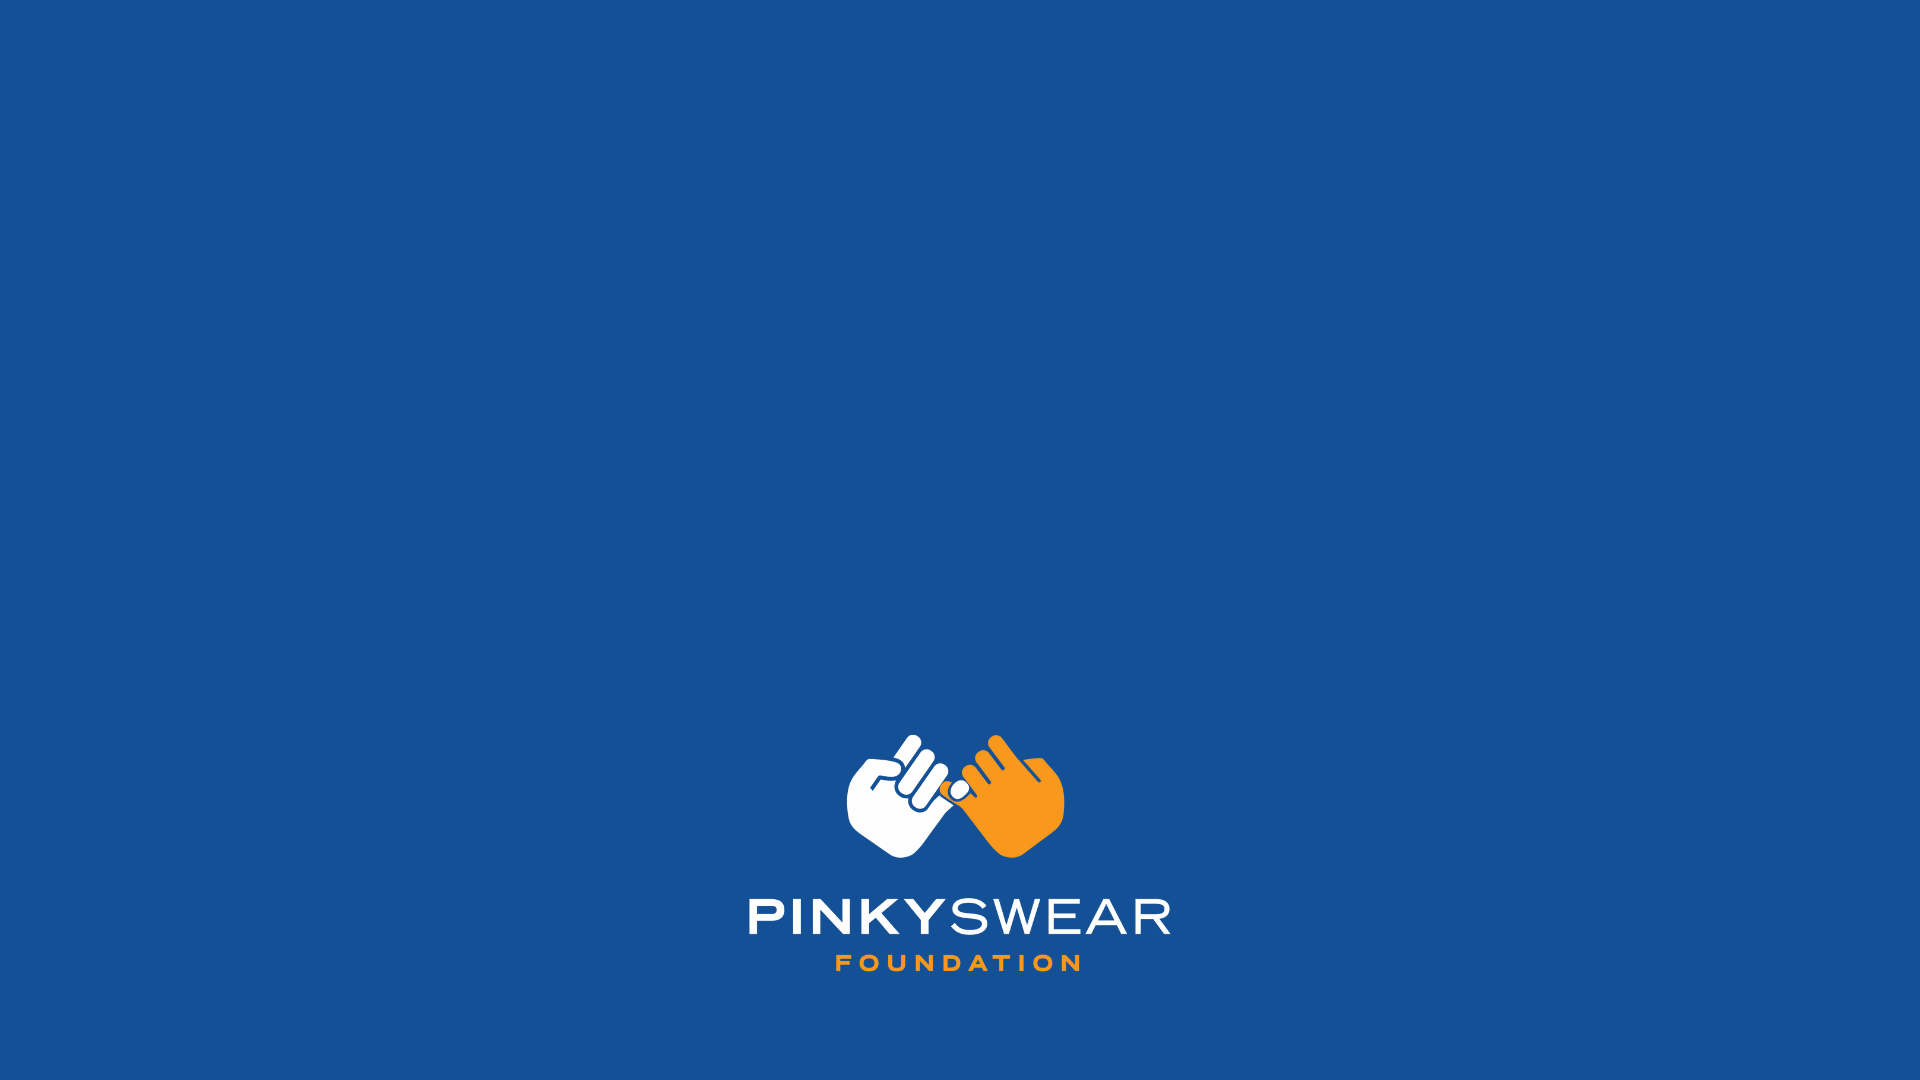 blue background image with a white and orange Pinky Swear Foundation logo